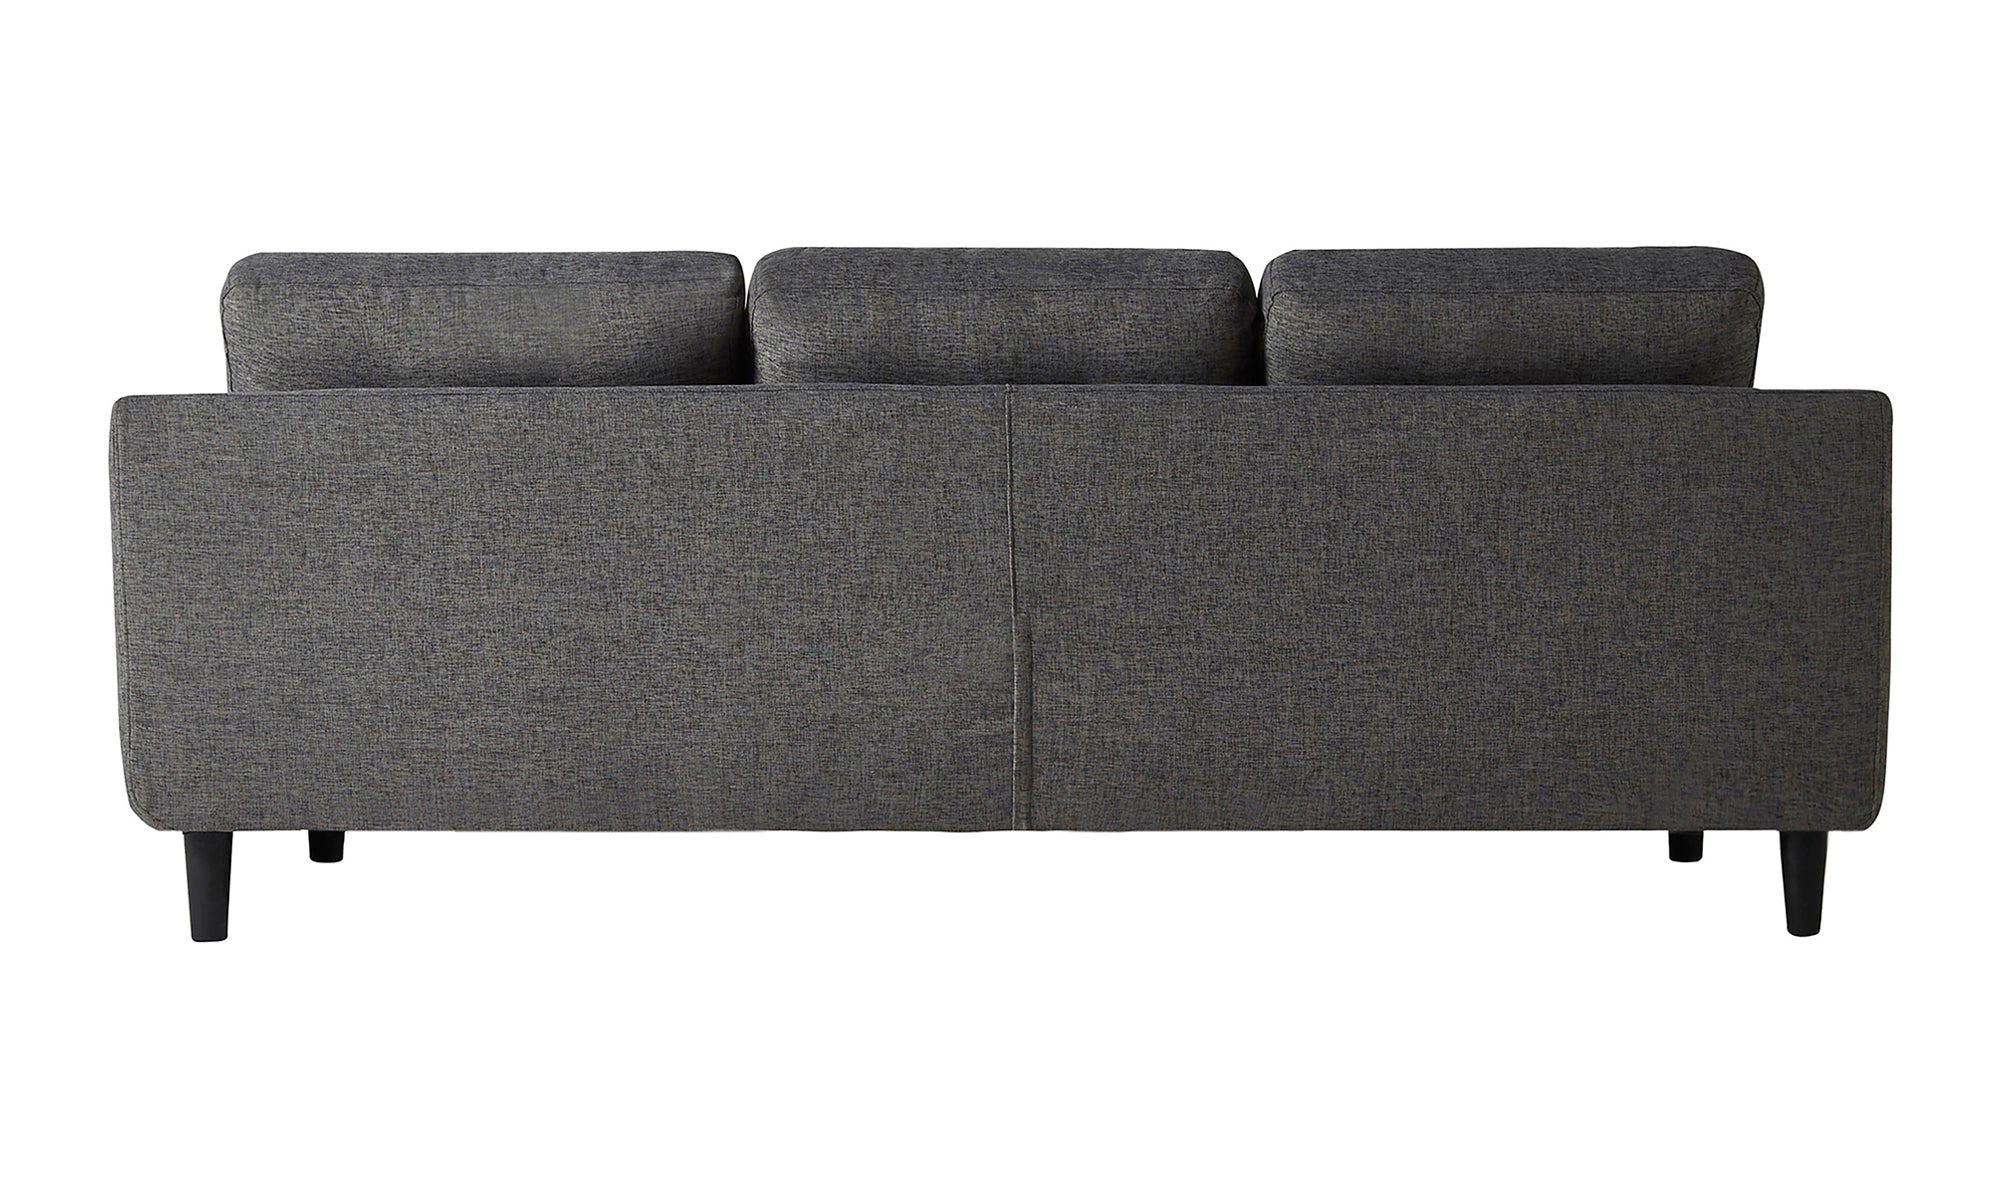 Belagio Left Facing Sofa Bed With Chaise - Charcoal Grey